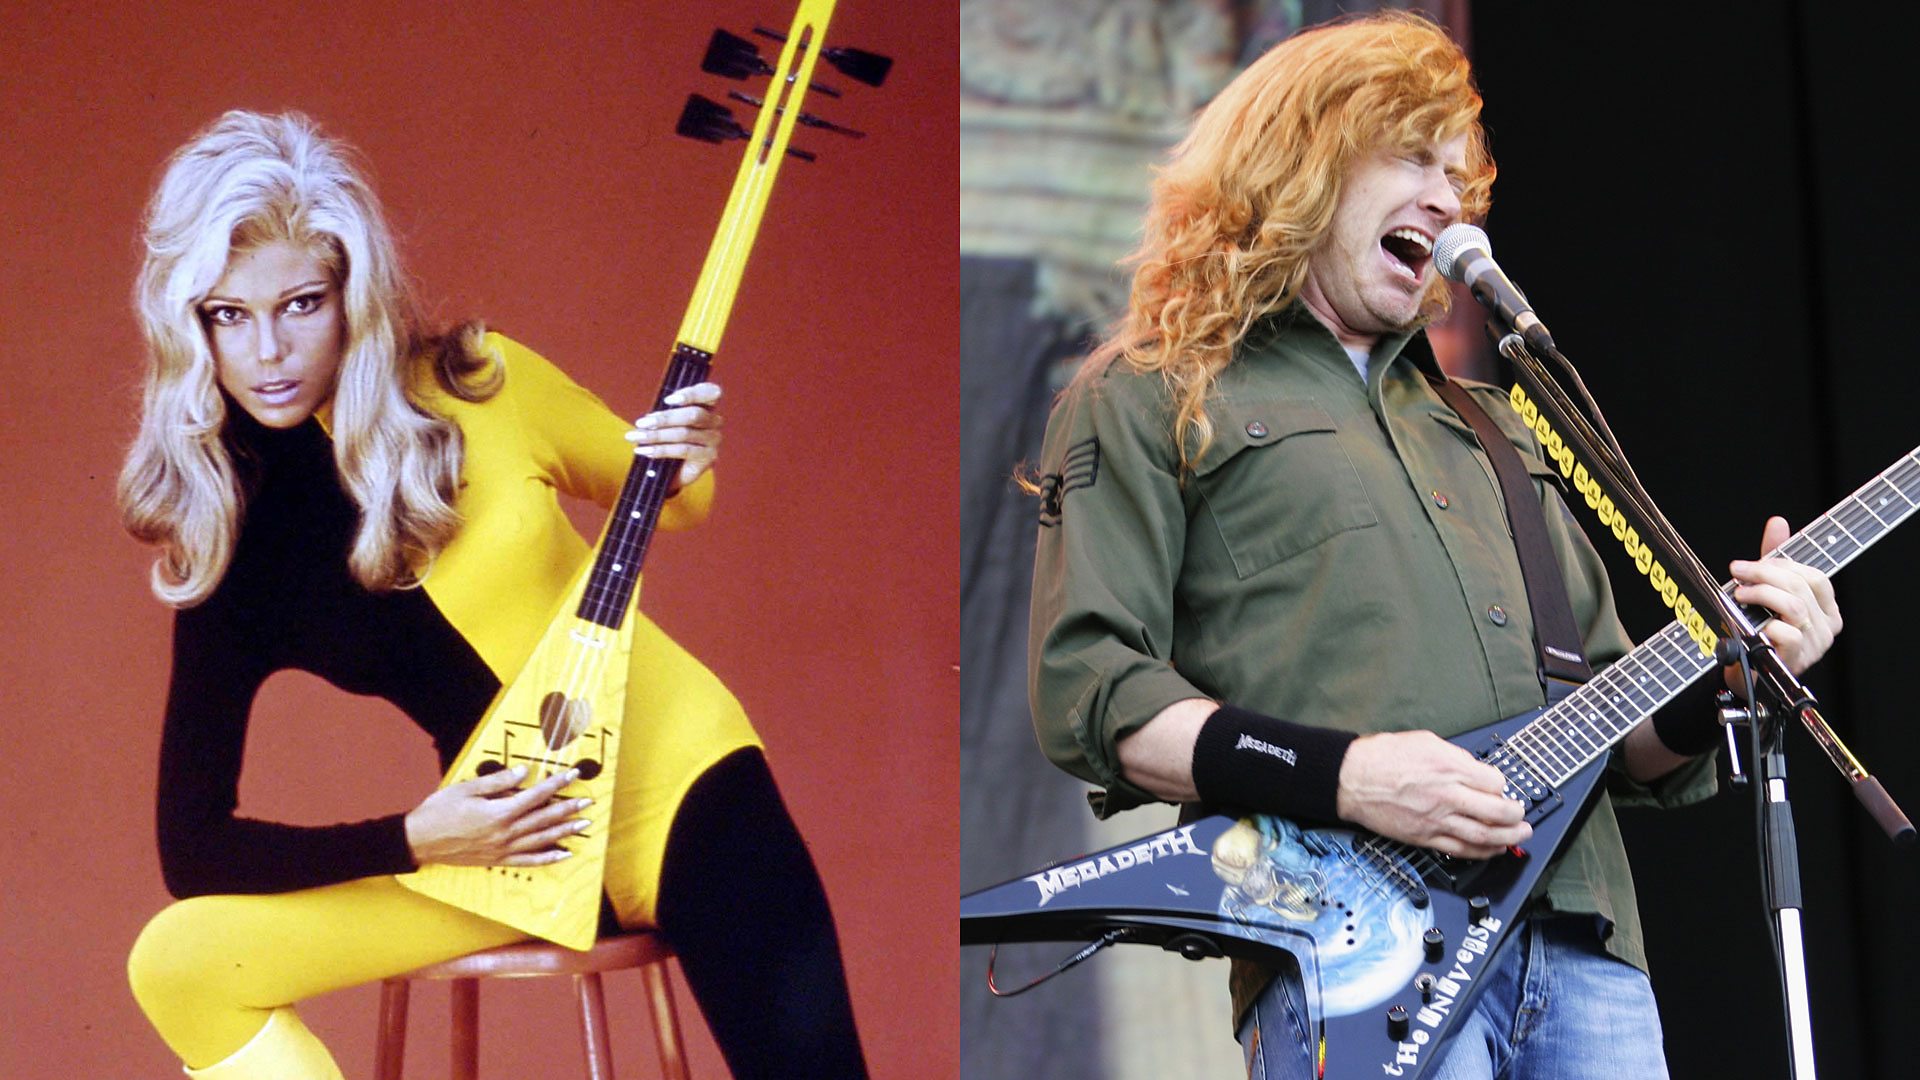 The Most Controversial Singers in Rock + Metal